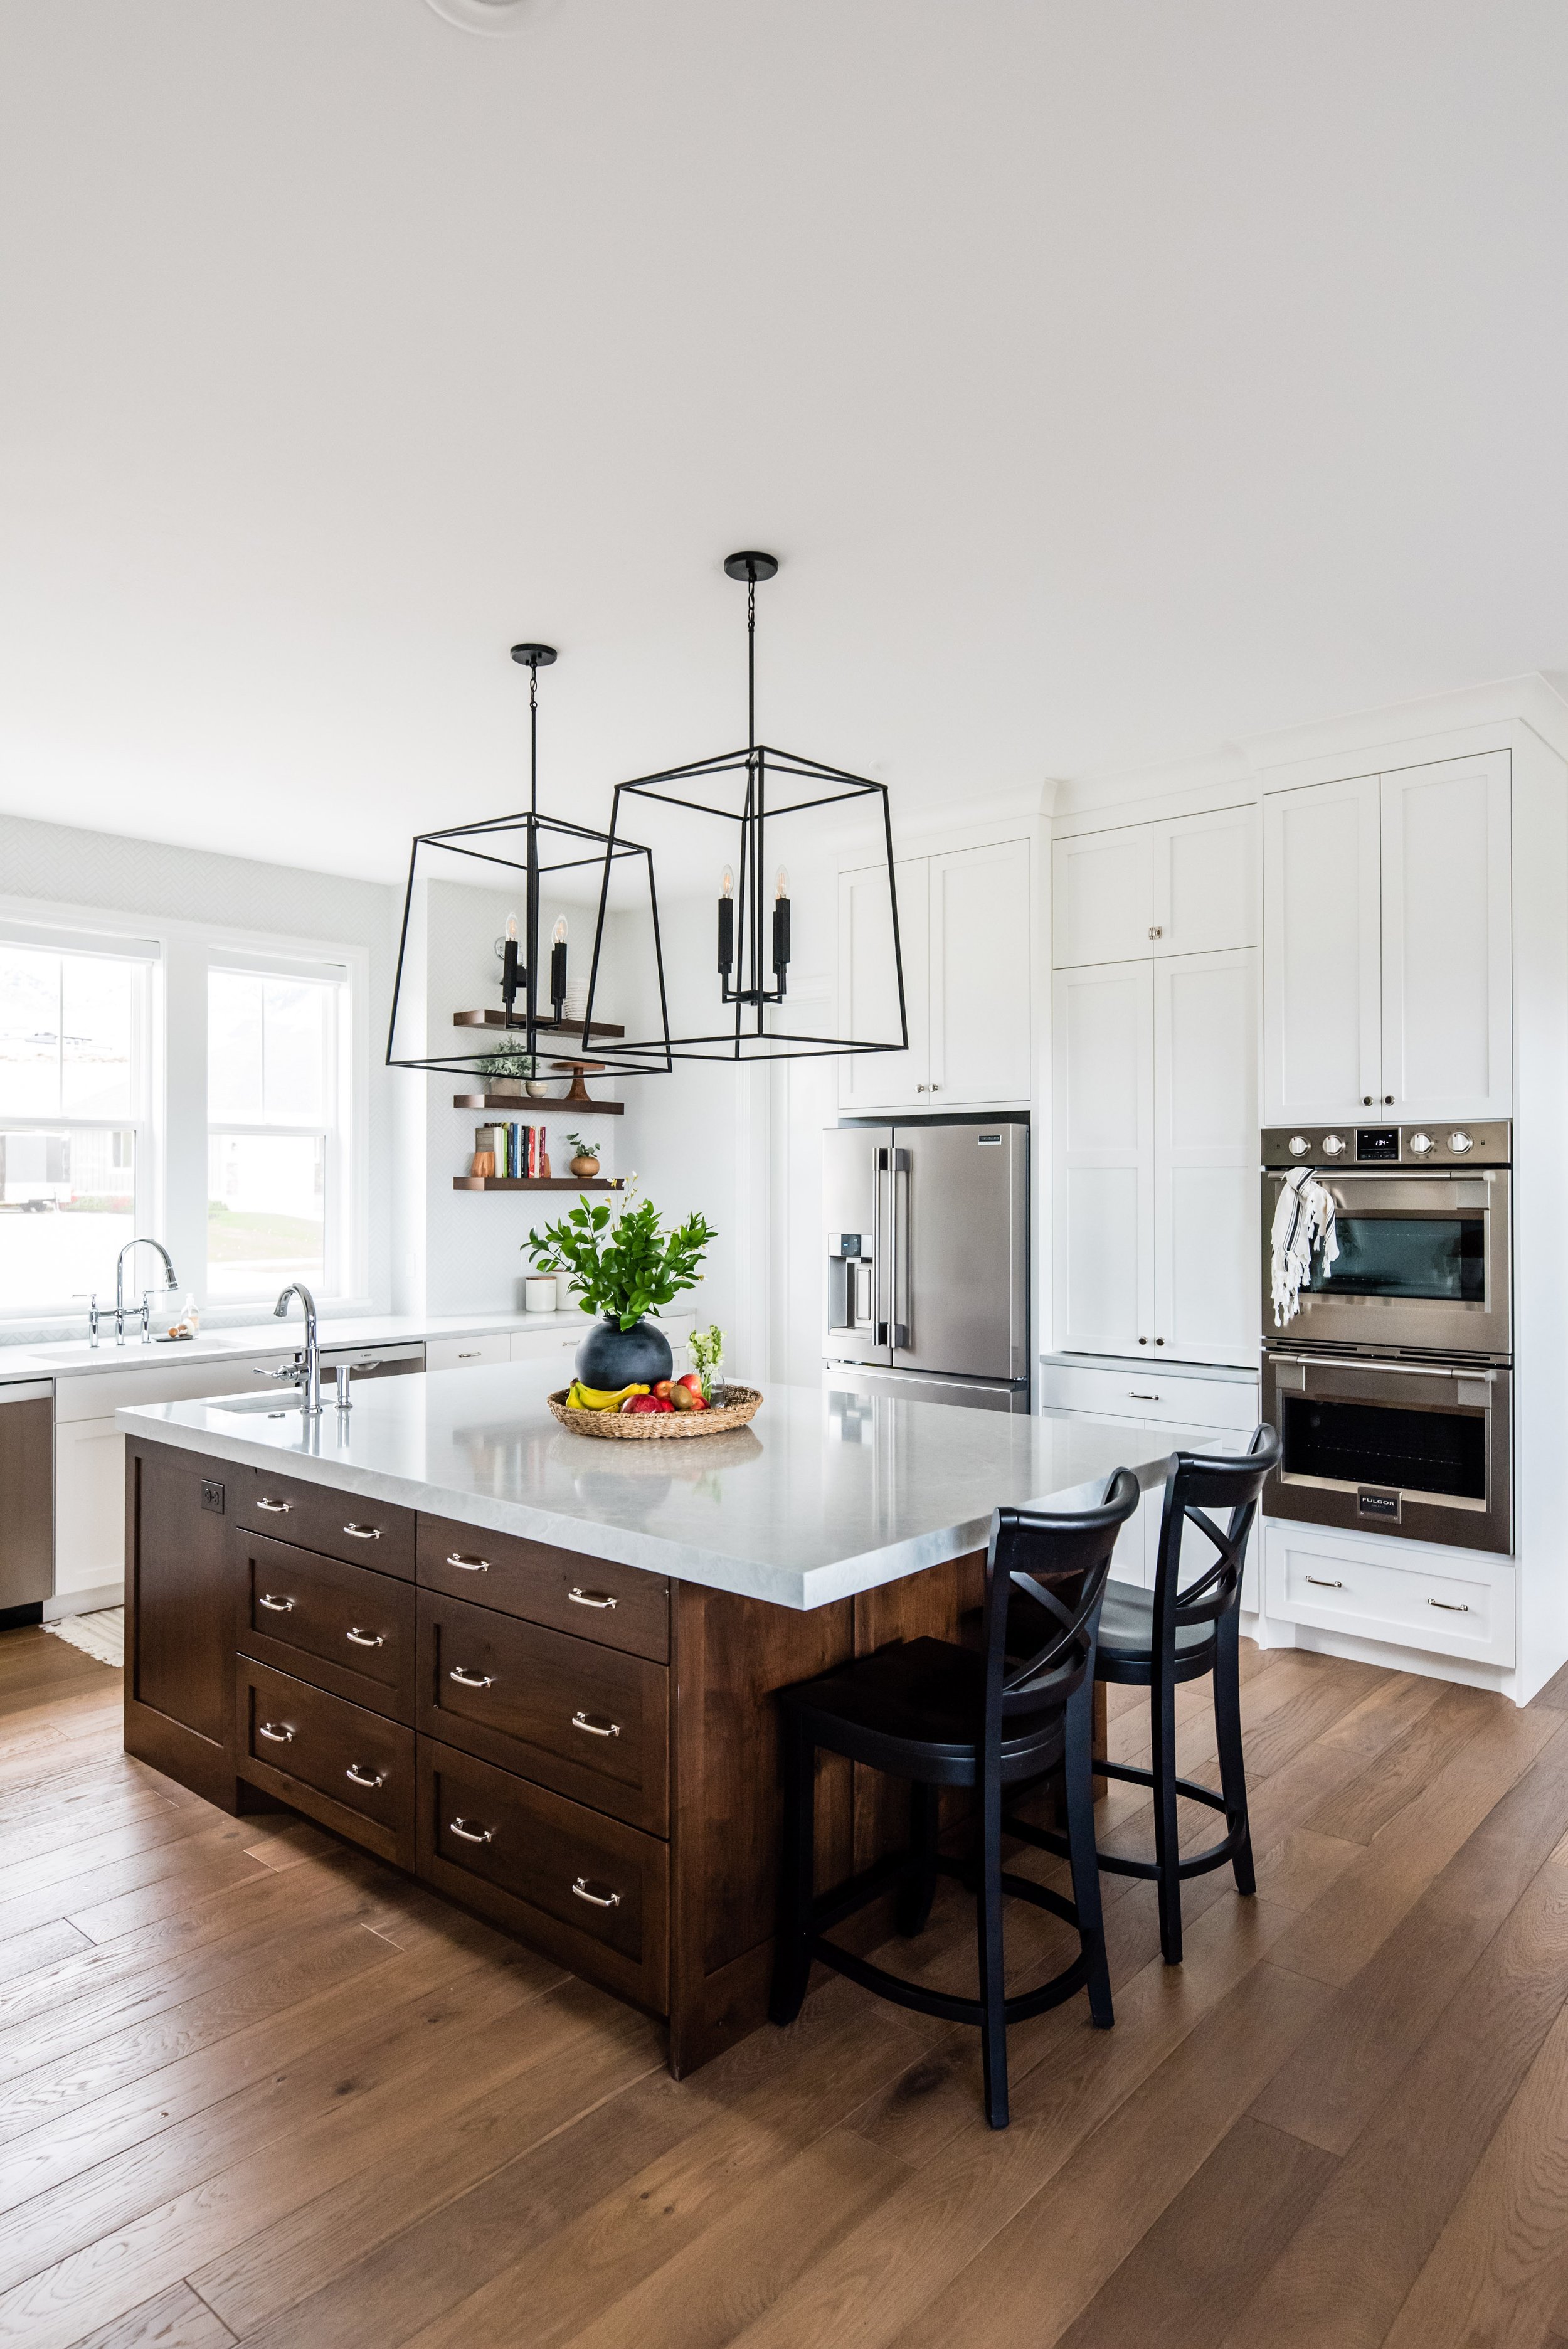  Picking natural wood cabinets for your kitchen island with white cabinets in the kitchen by Liz Powell Design. modern feel kitchen big new kitchen #LizPowellDesign #InteriorDesignUtah #InteriorDesigner #buildingahome #cabinetry #dreamhome #interiors